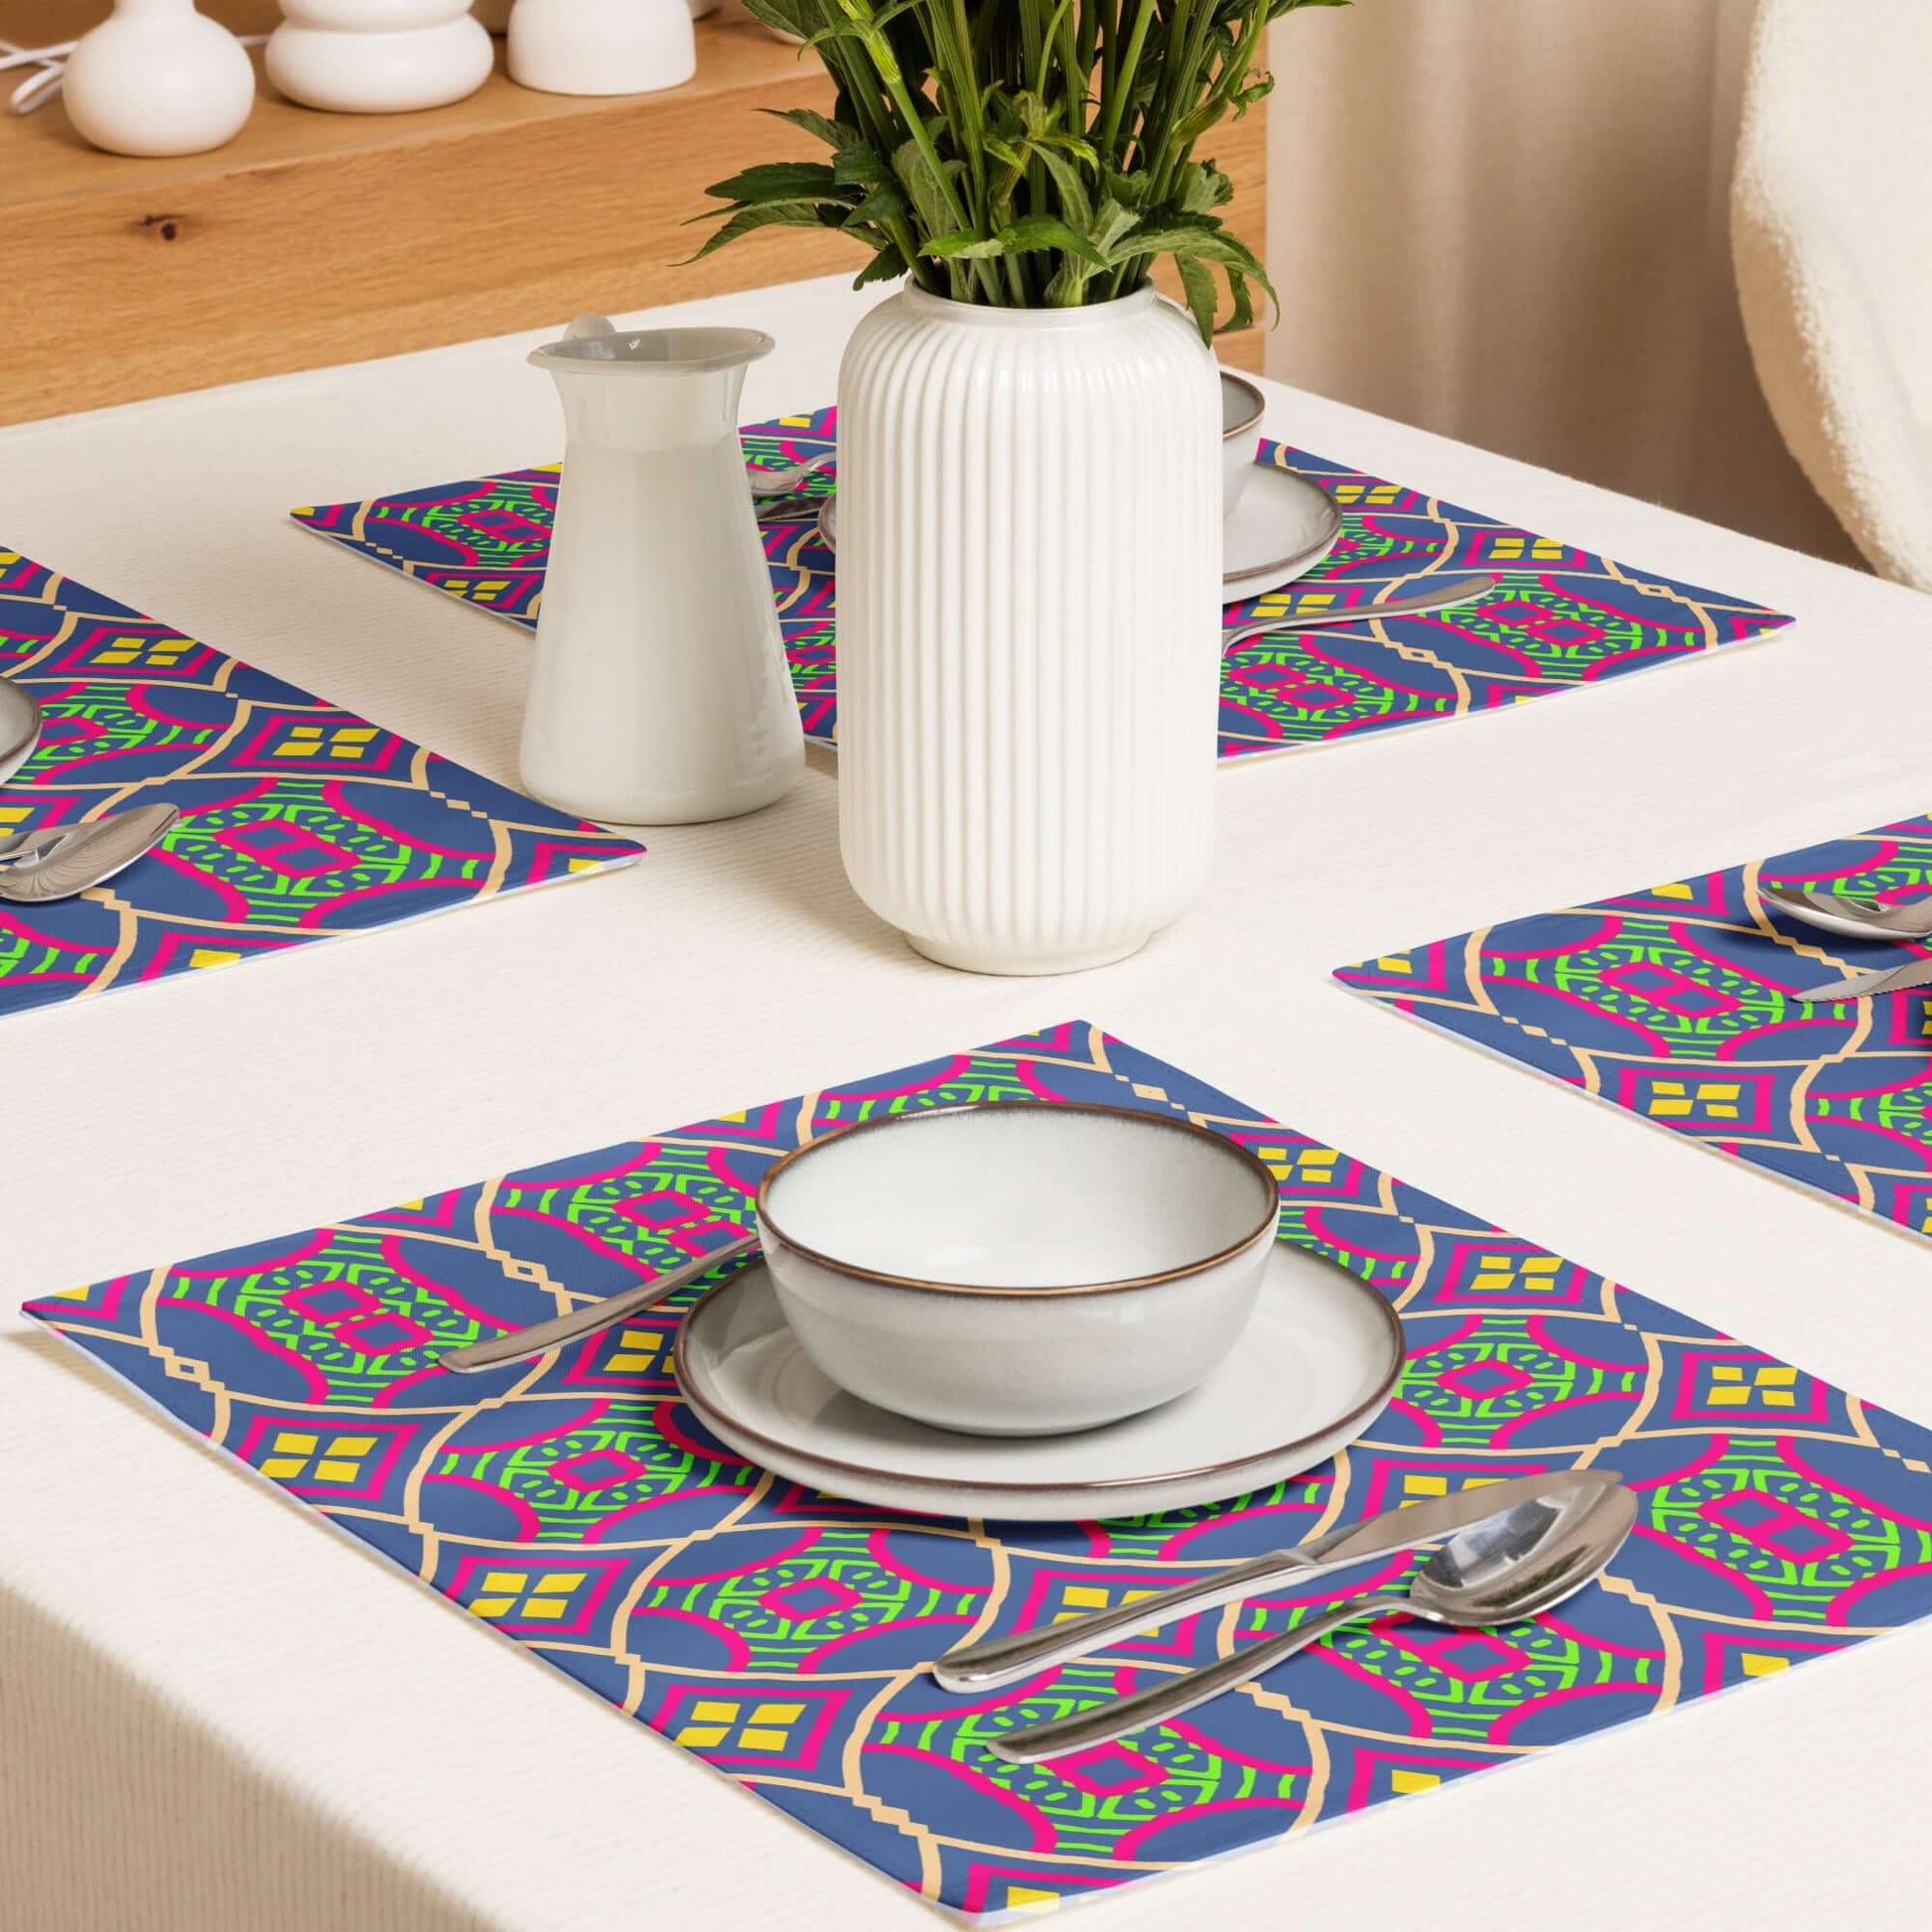 placemats